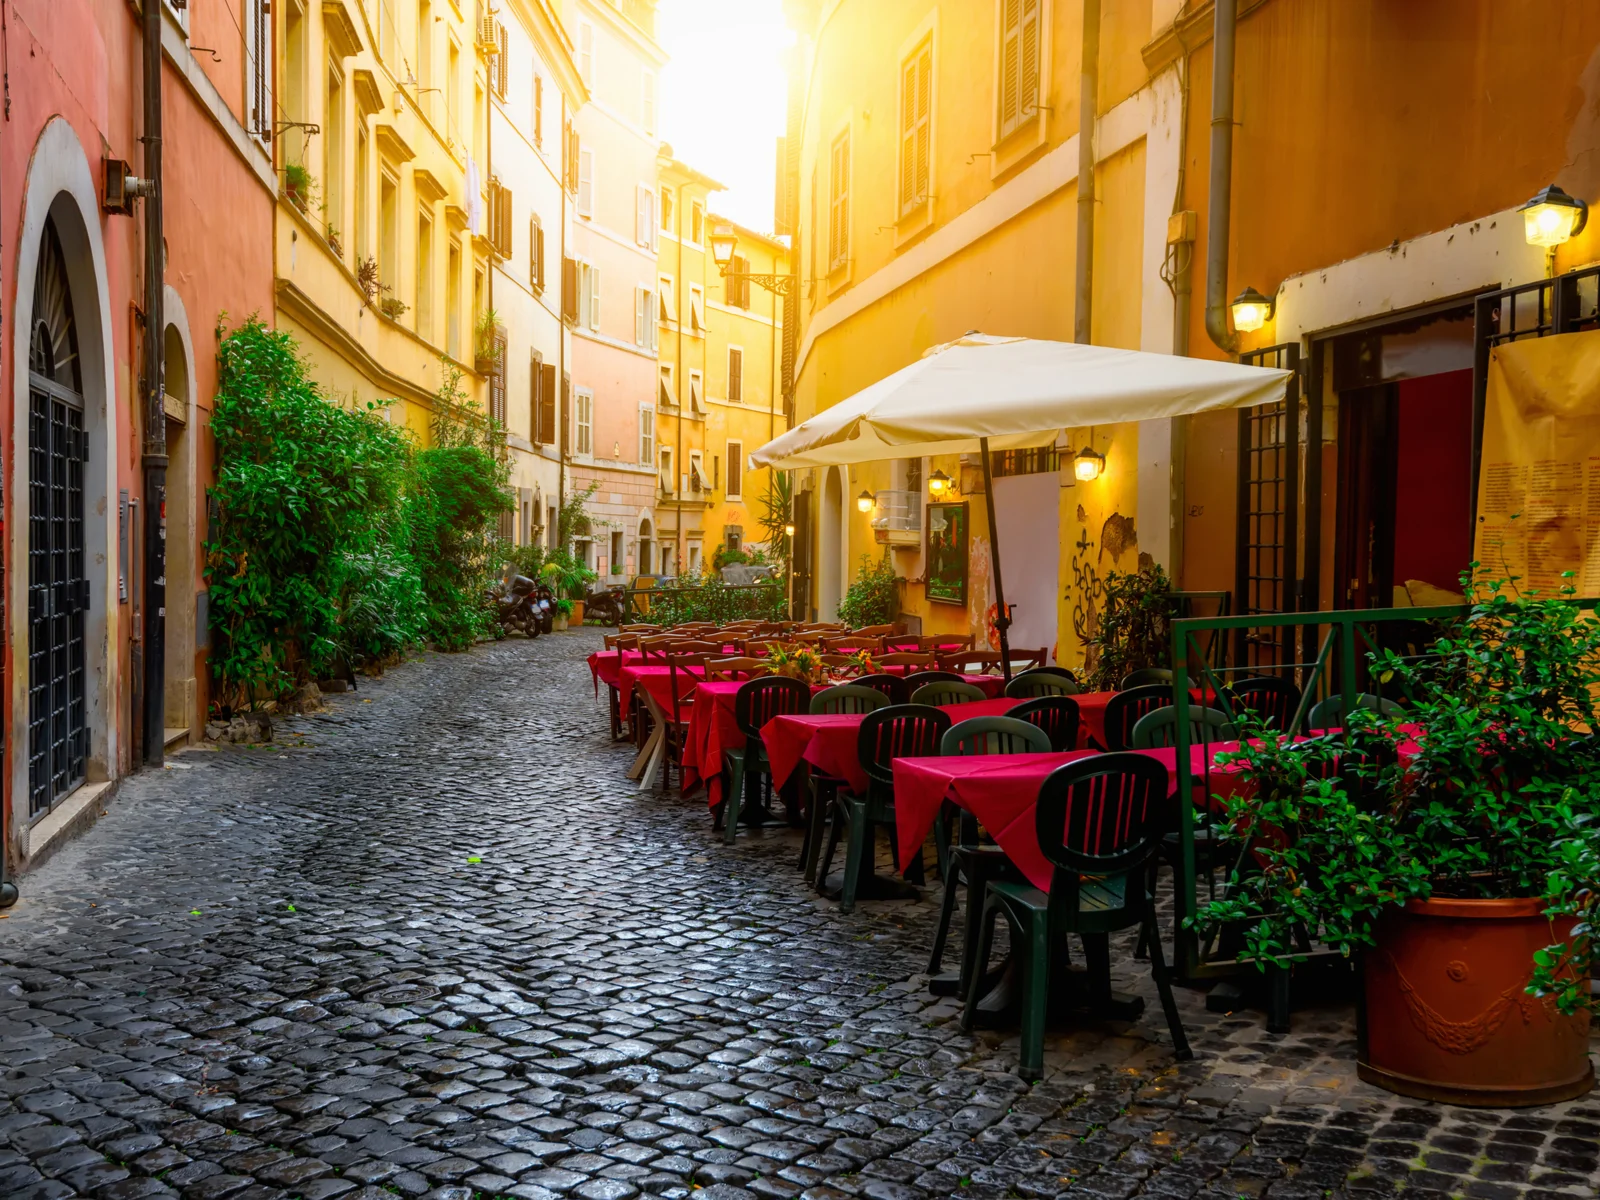 Cozy coffee shop pictured during the least busy time to visit Italy while the sun sets on the town square